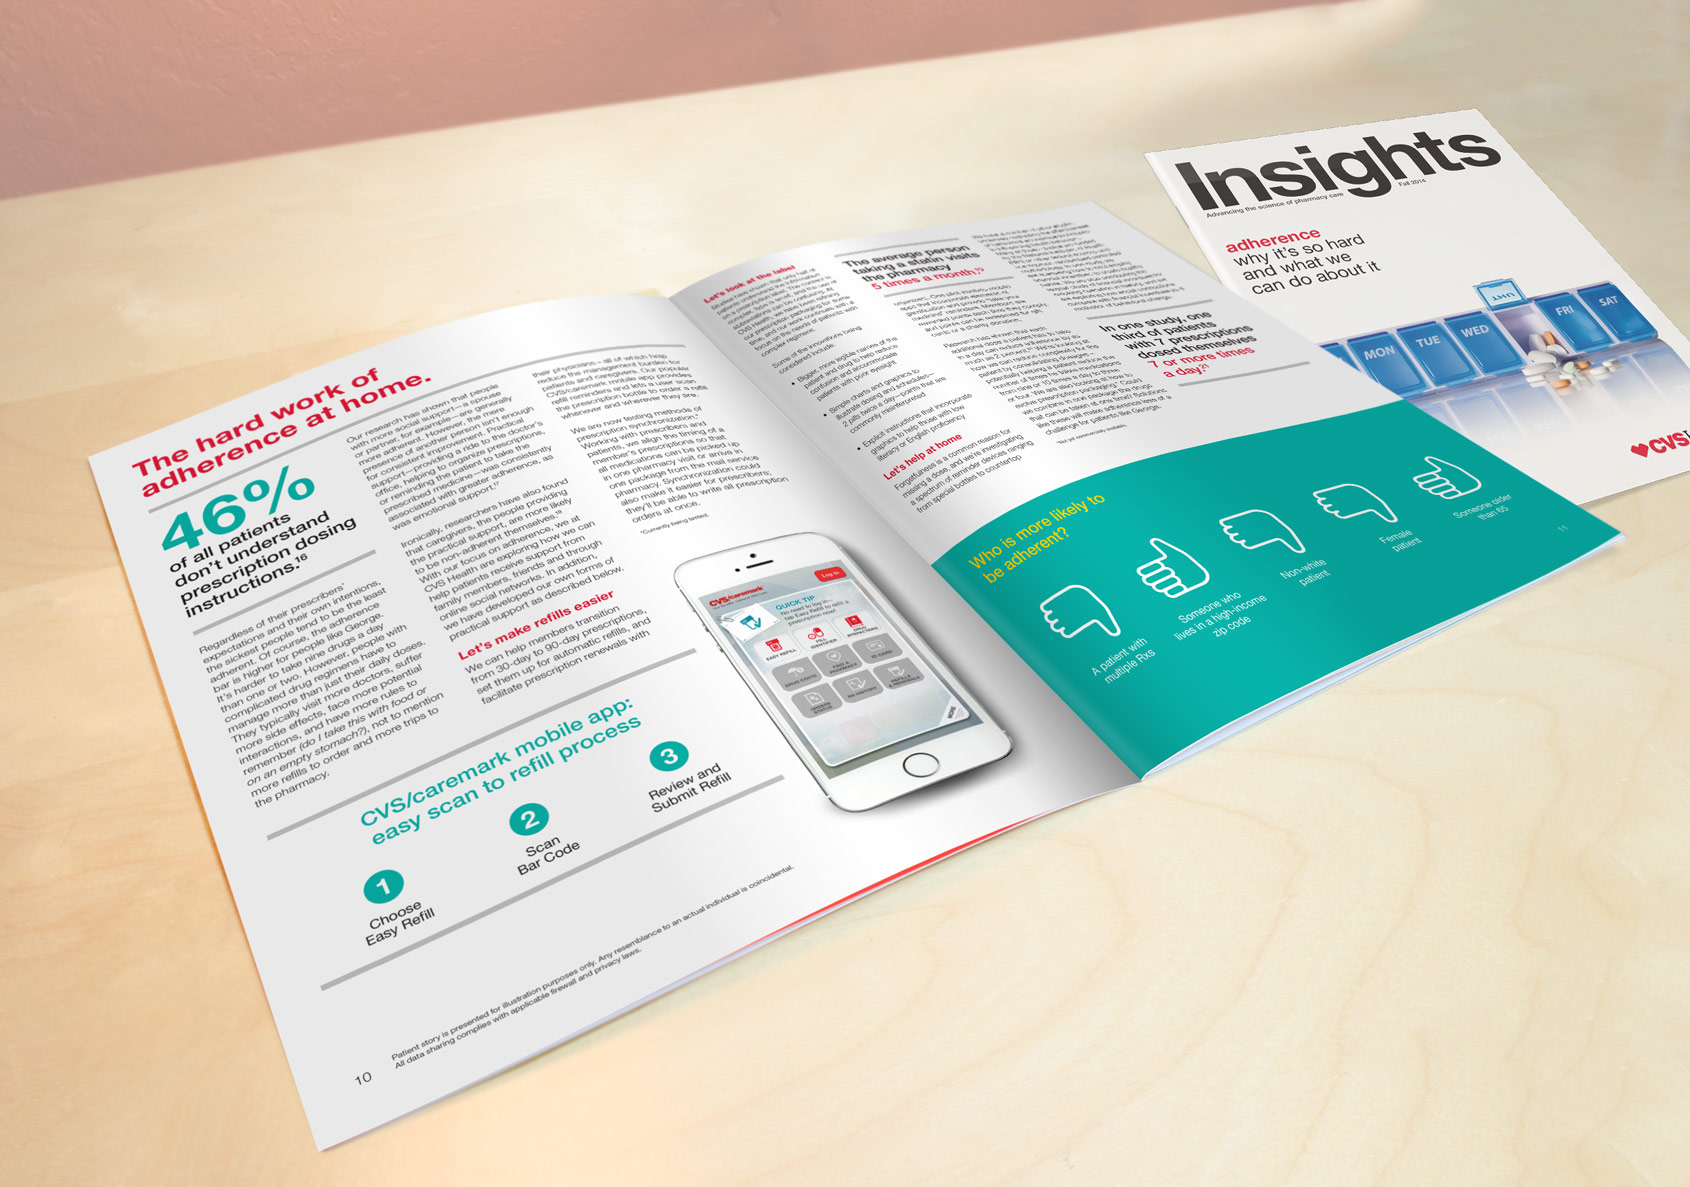 CVS-insights-cover-and-spread-hero